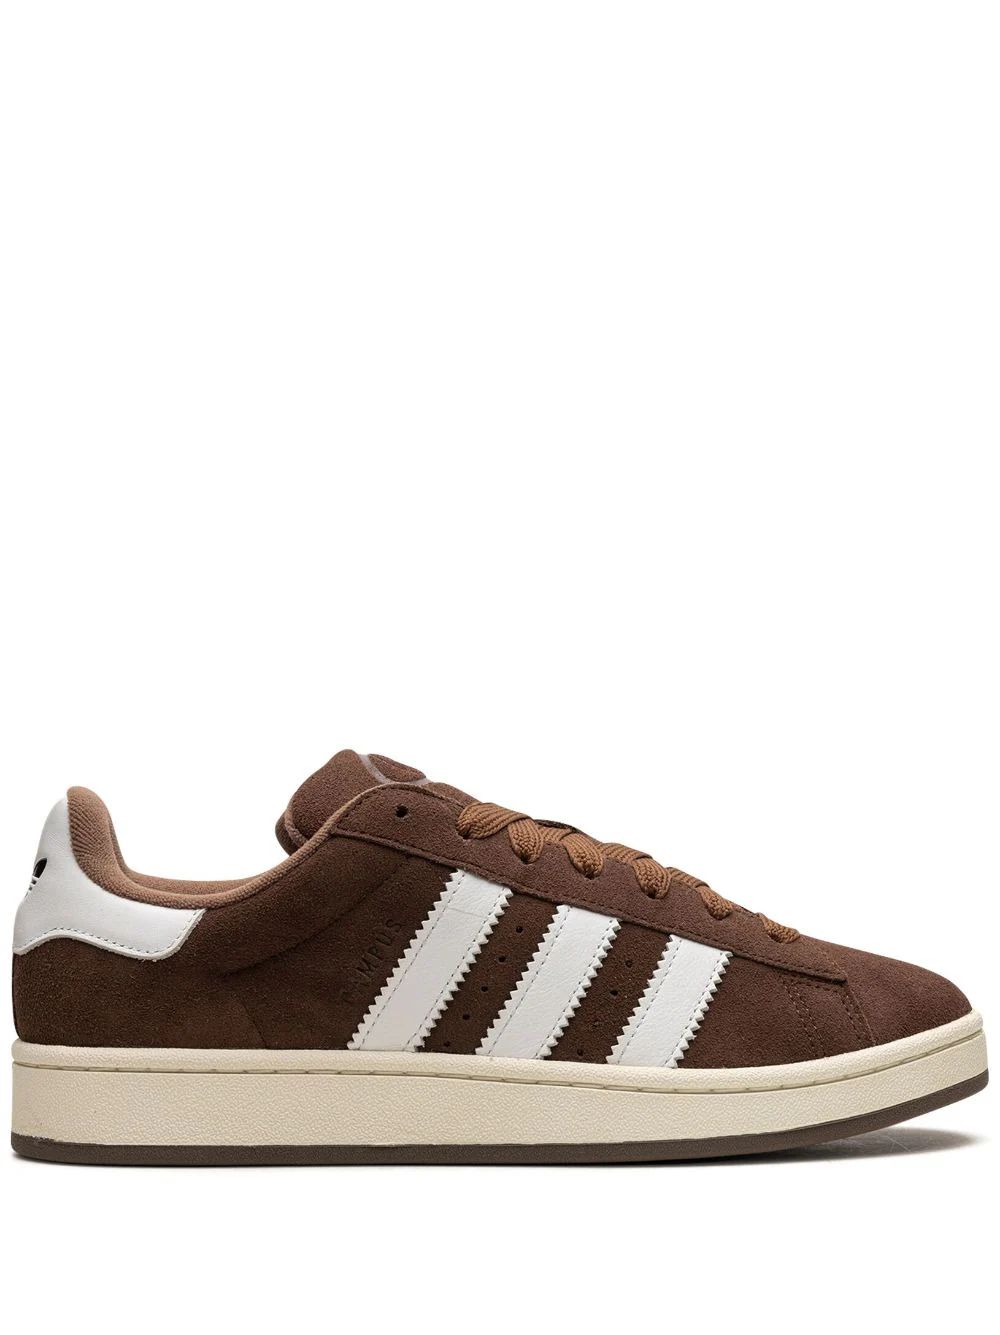 The DetailsadidasCampus 00s "Bark" sneakersA true classic, the adidas Campus 00s is back for the ... | Farfetch Global